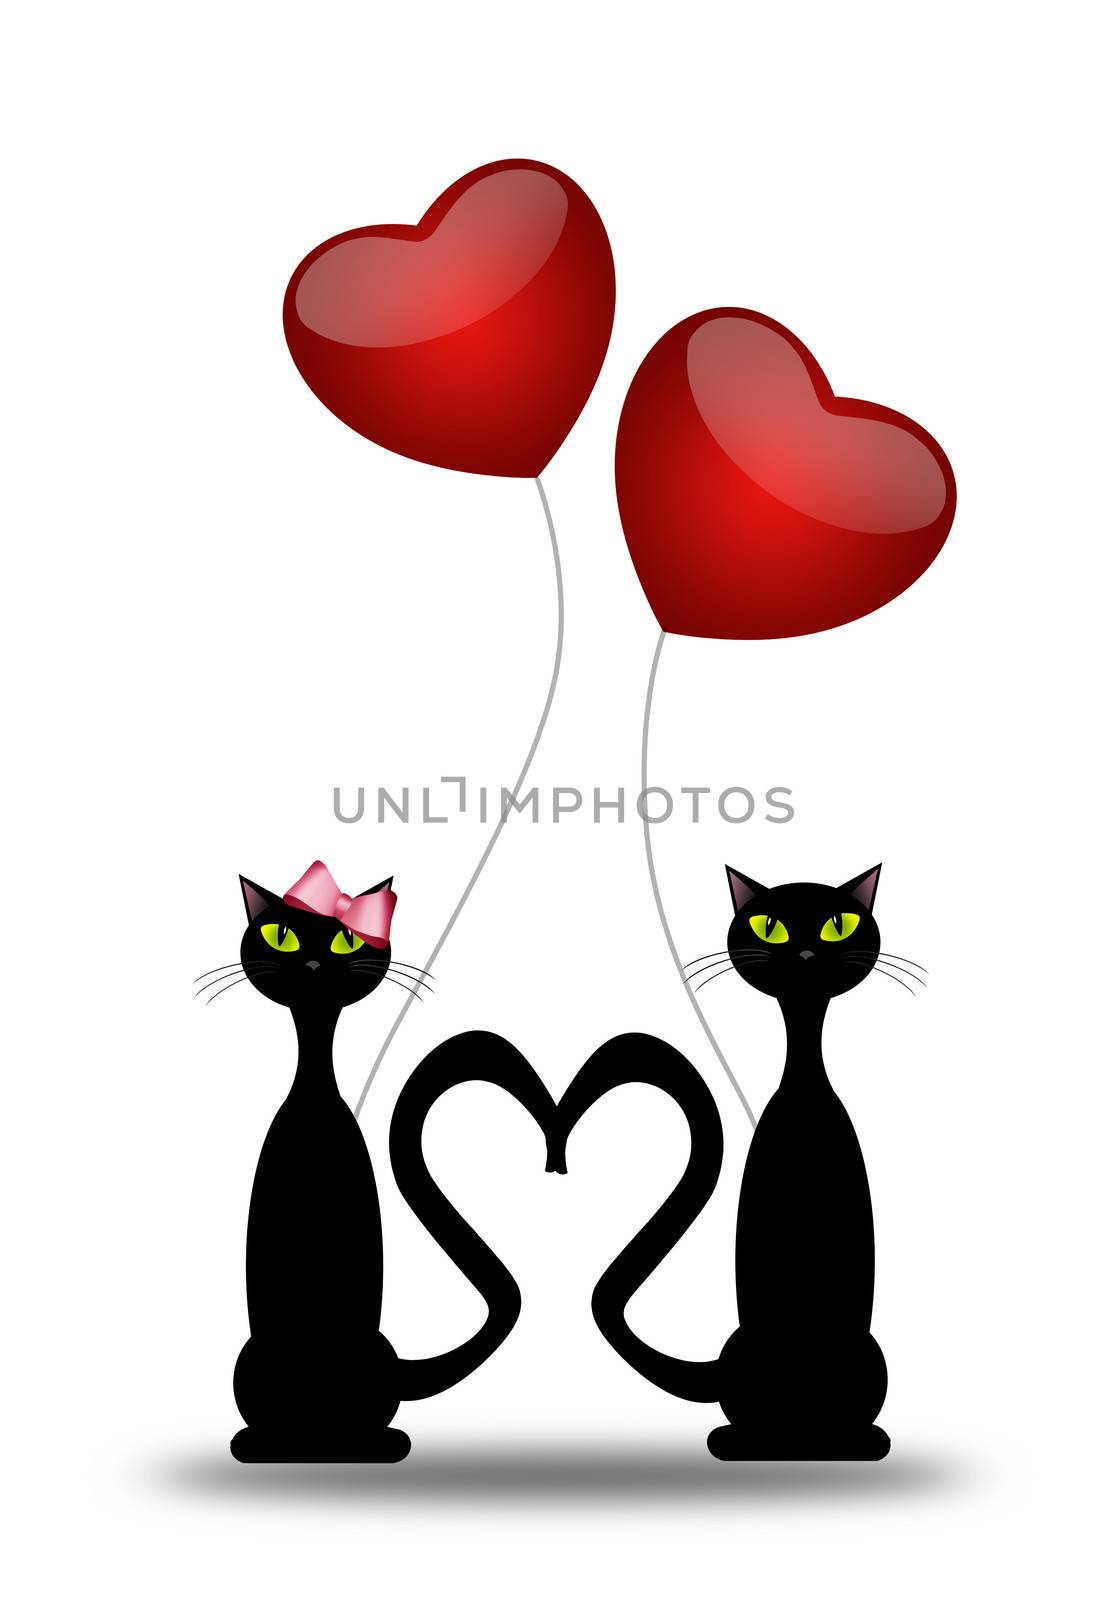 cats with balloons by sognolucido